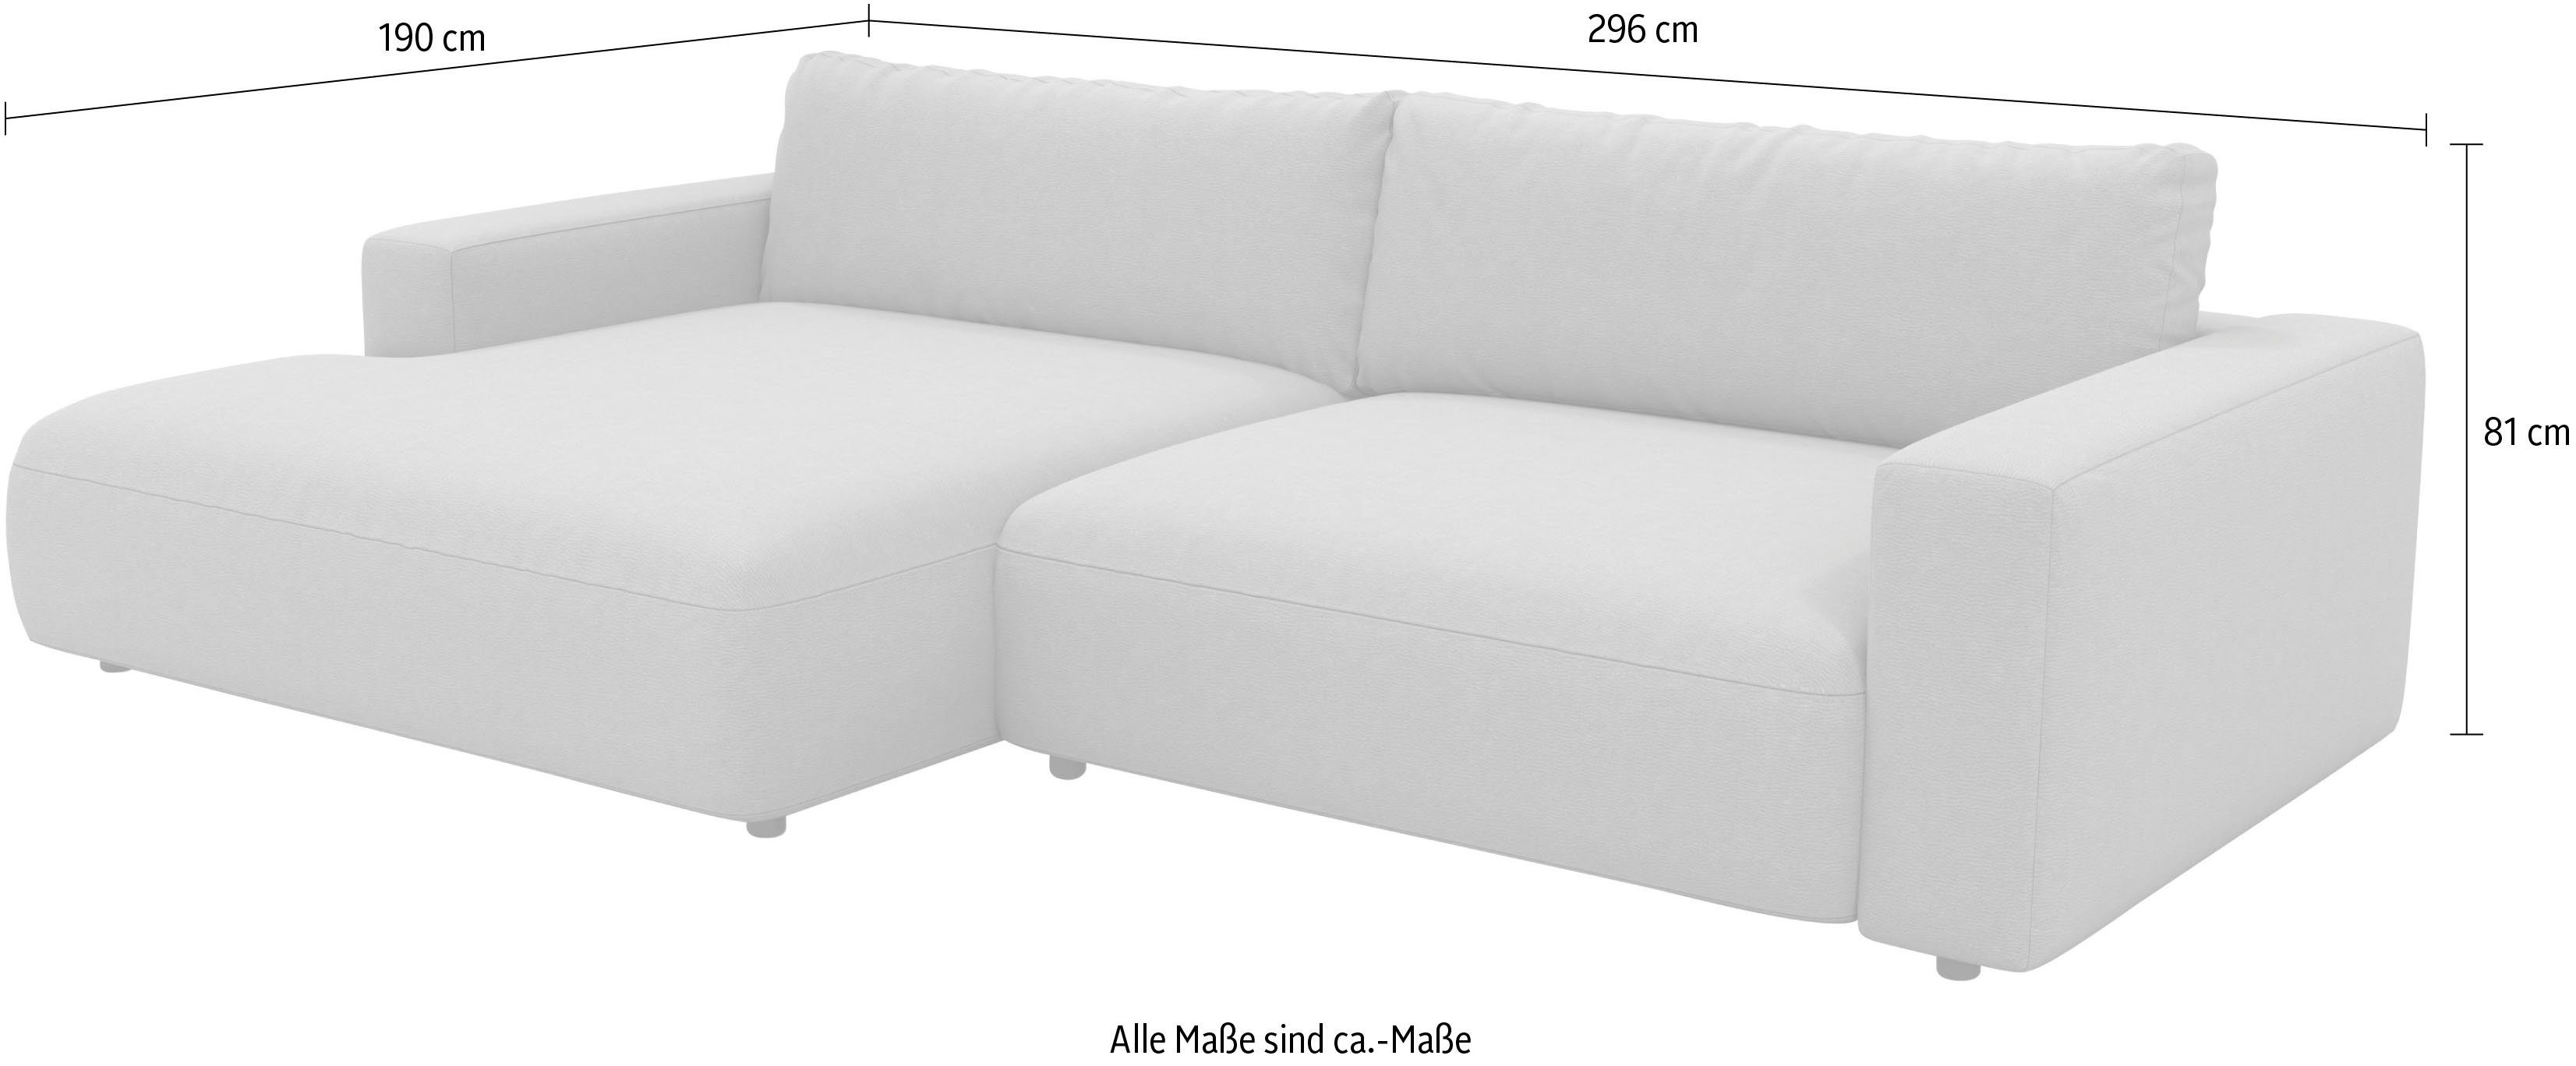 Ecksofa M GALLERY by Musterring branded LUCIA